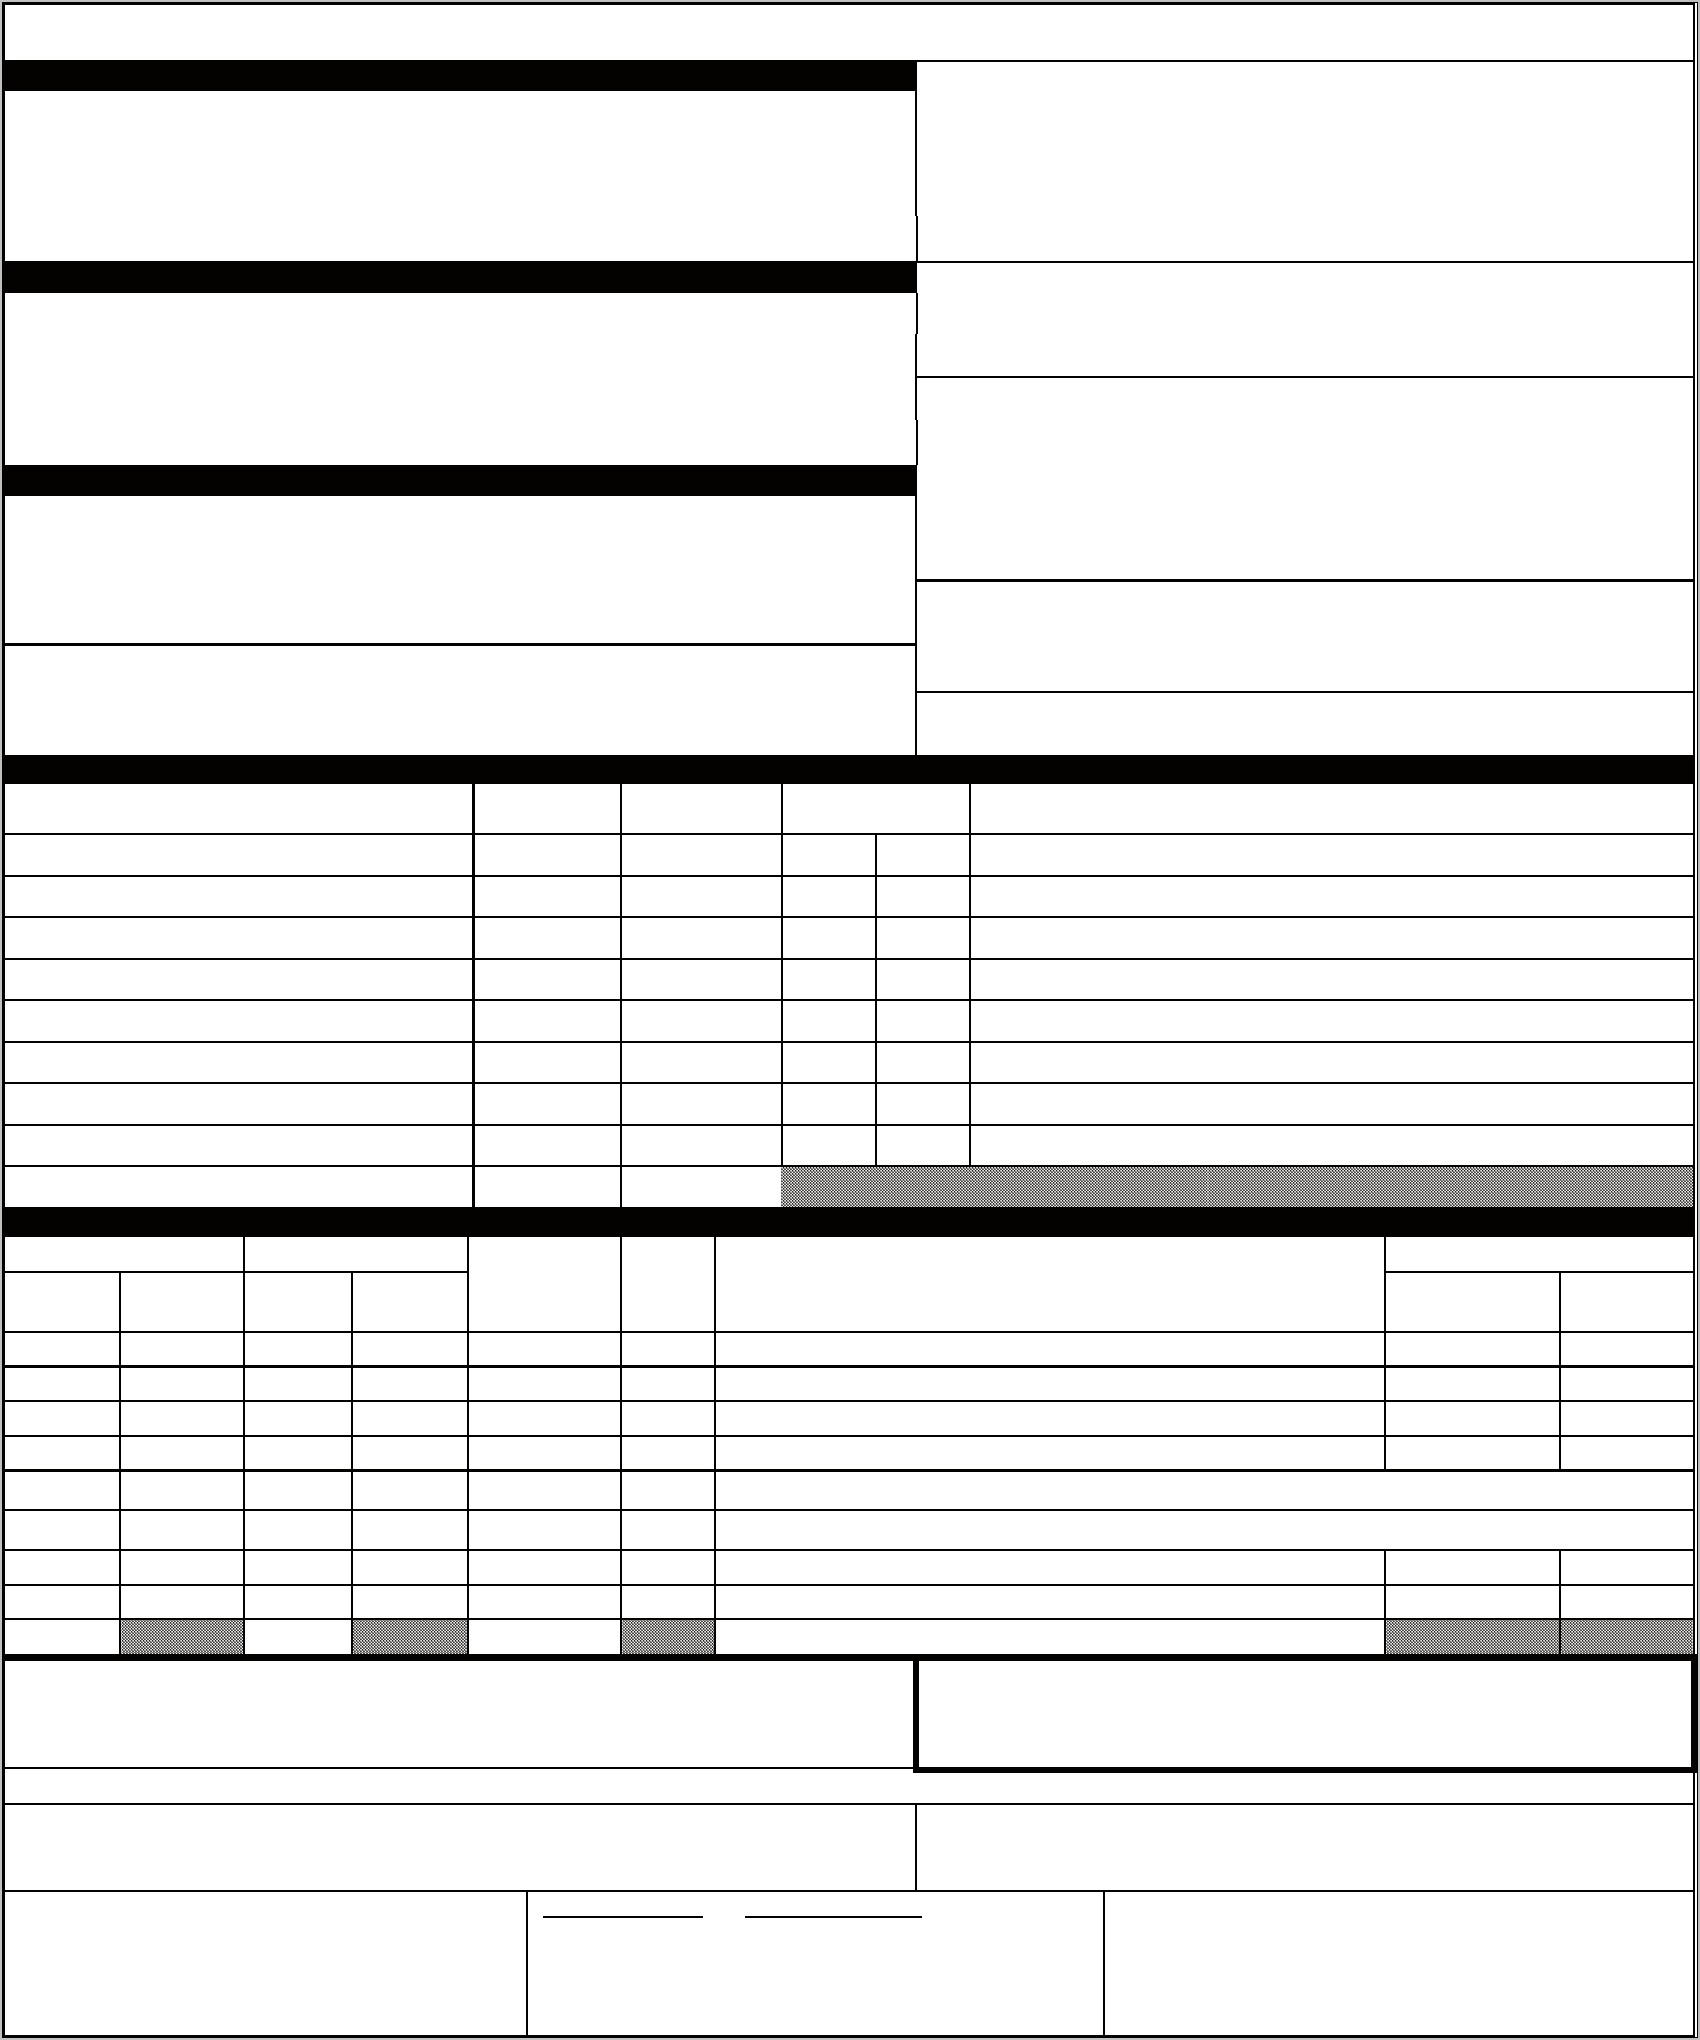 Blank Bill Of Lading Template Free